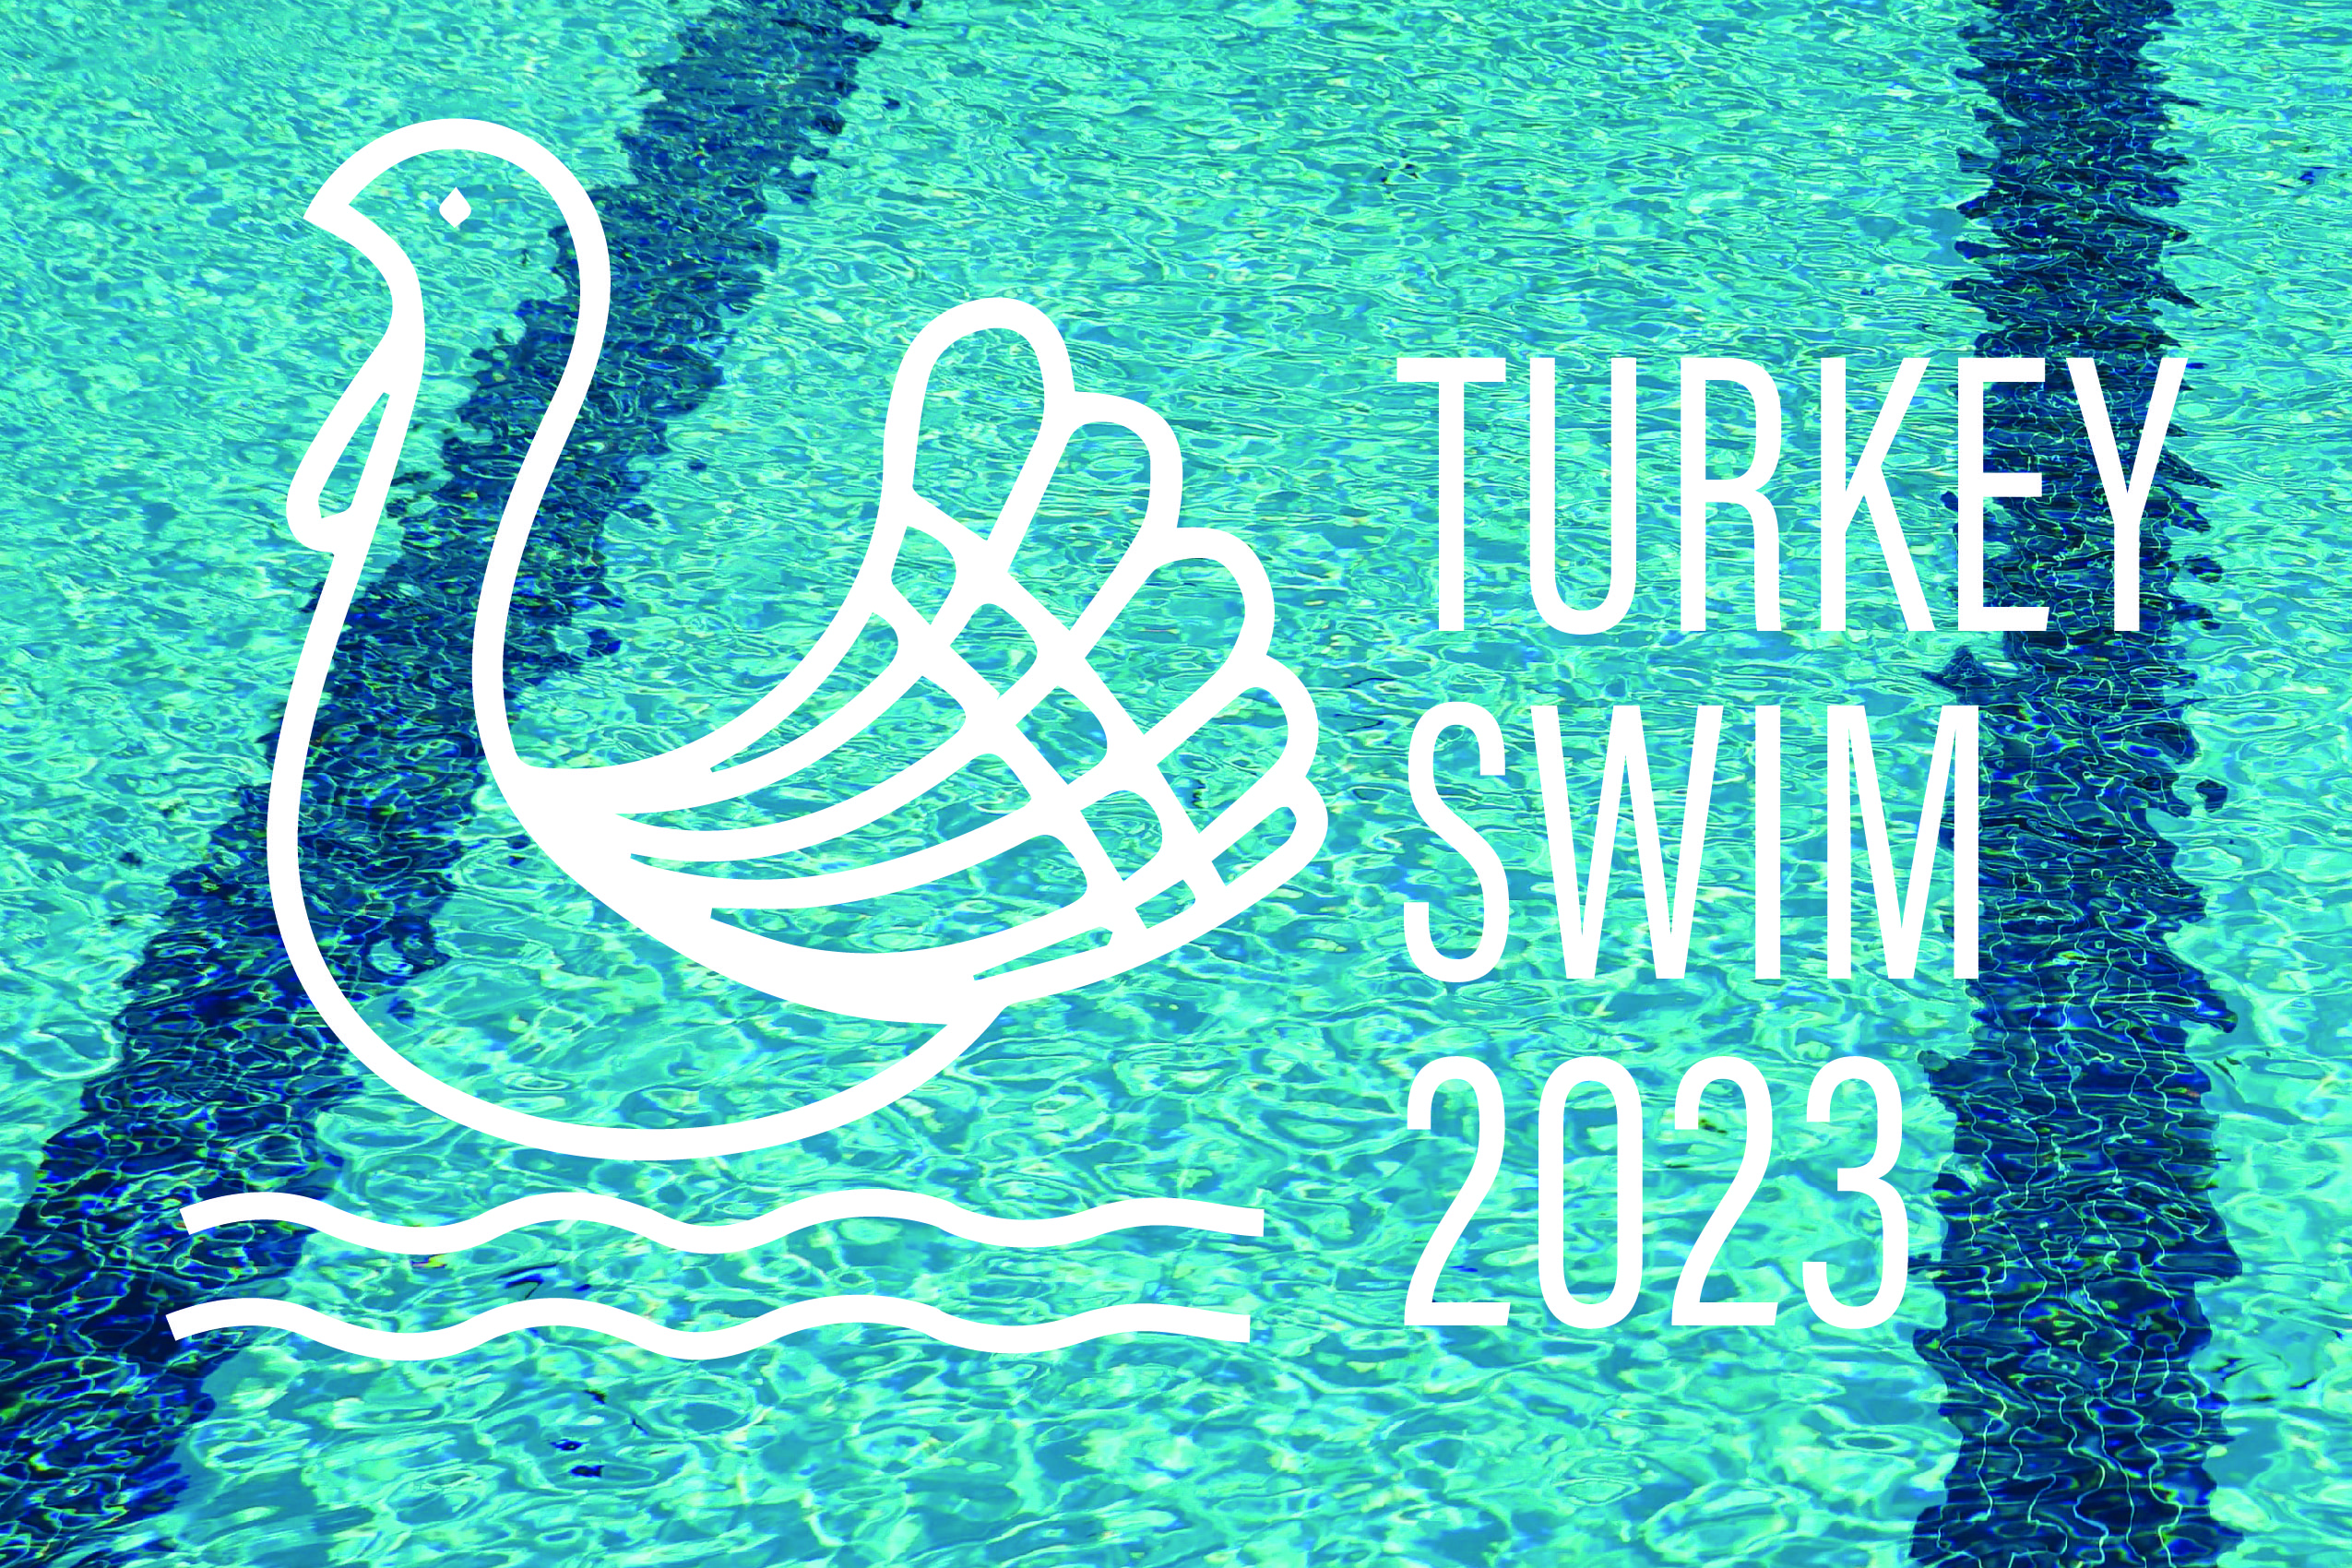 Abstract water background of blue lap pool with turkey swim logo and simple white outline of turkey.